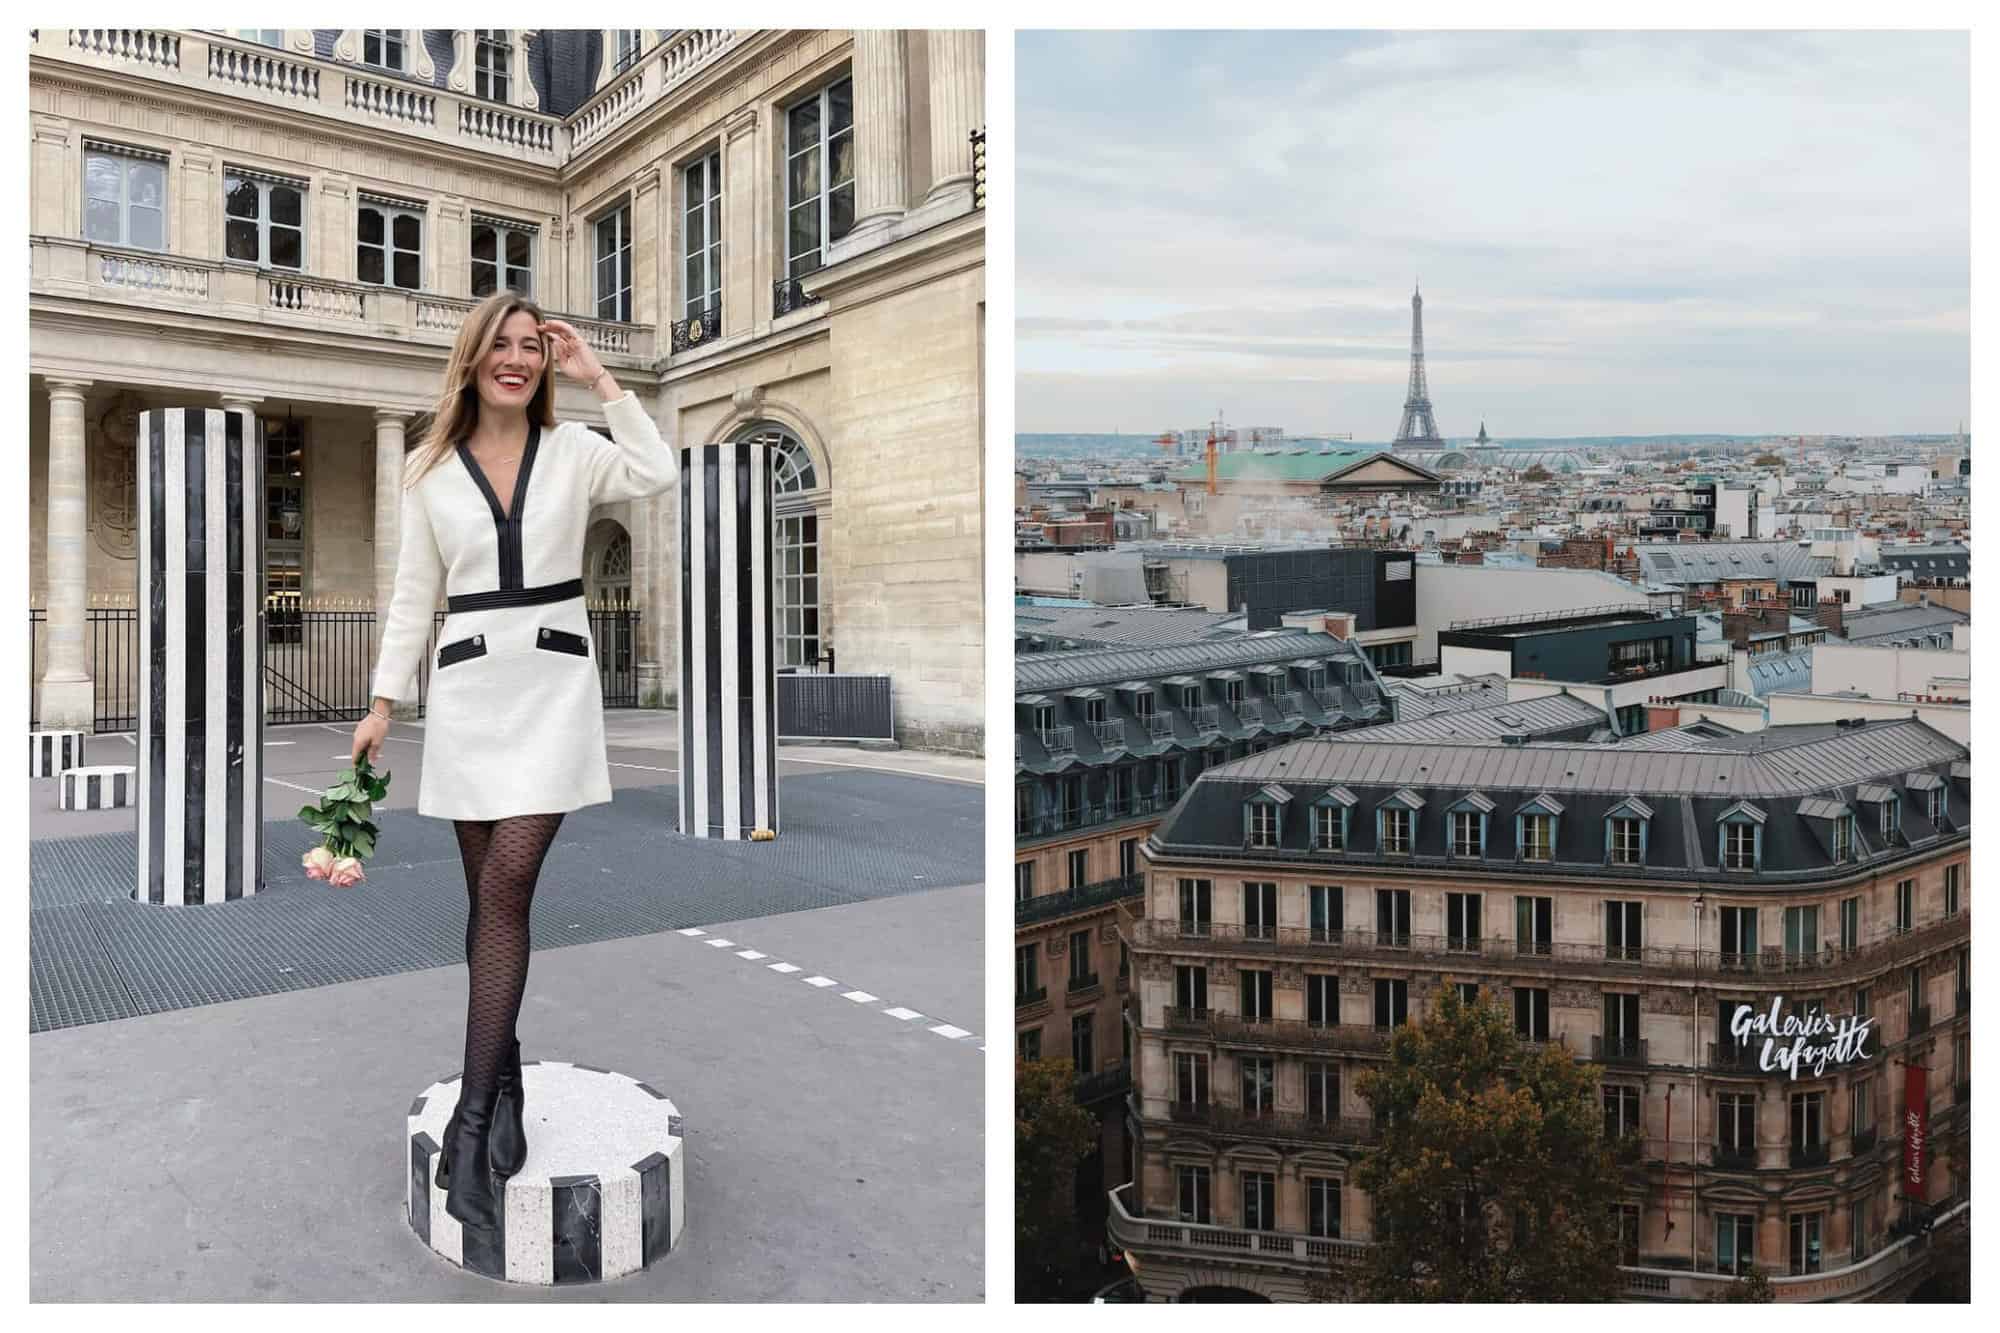 left photo: woman in courtyard with flowers in her hand, right photo: parisian rooftops with view of Eiffel tower